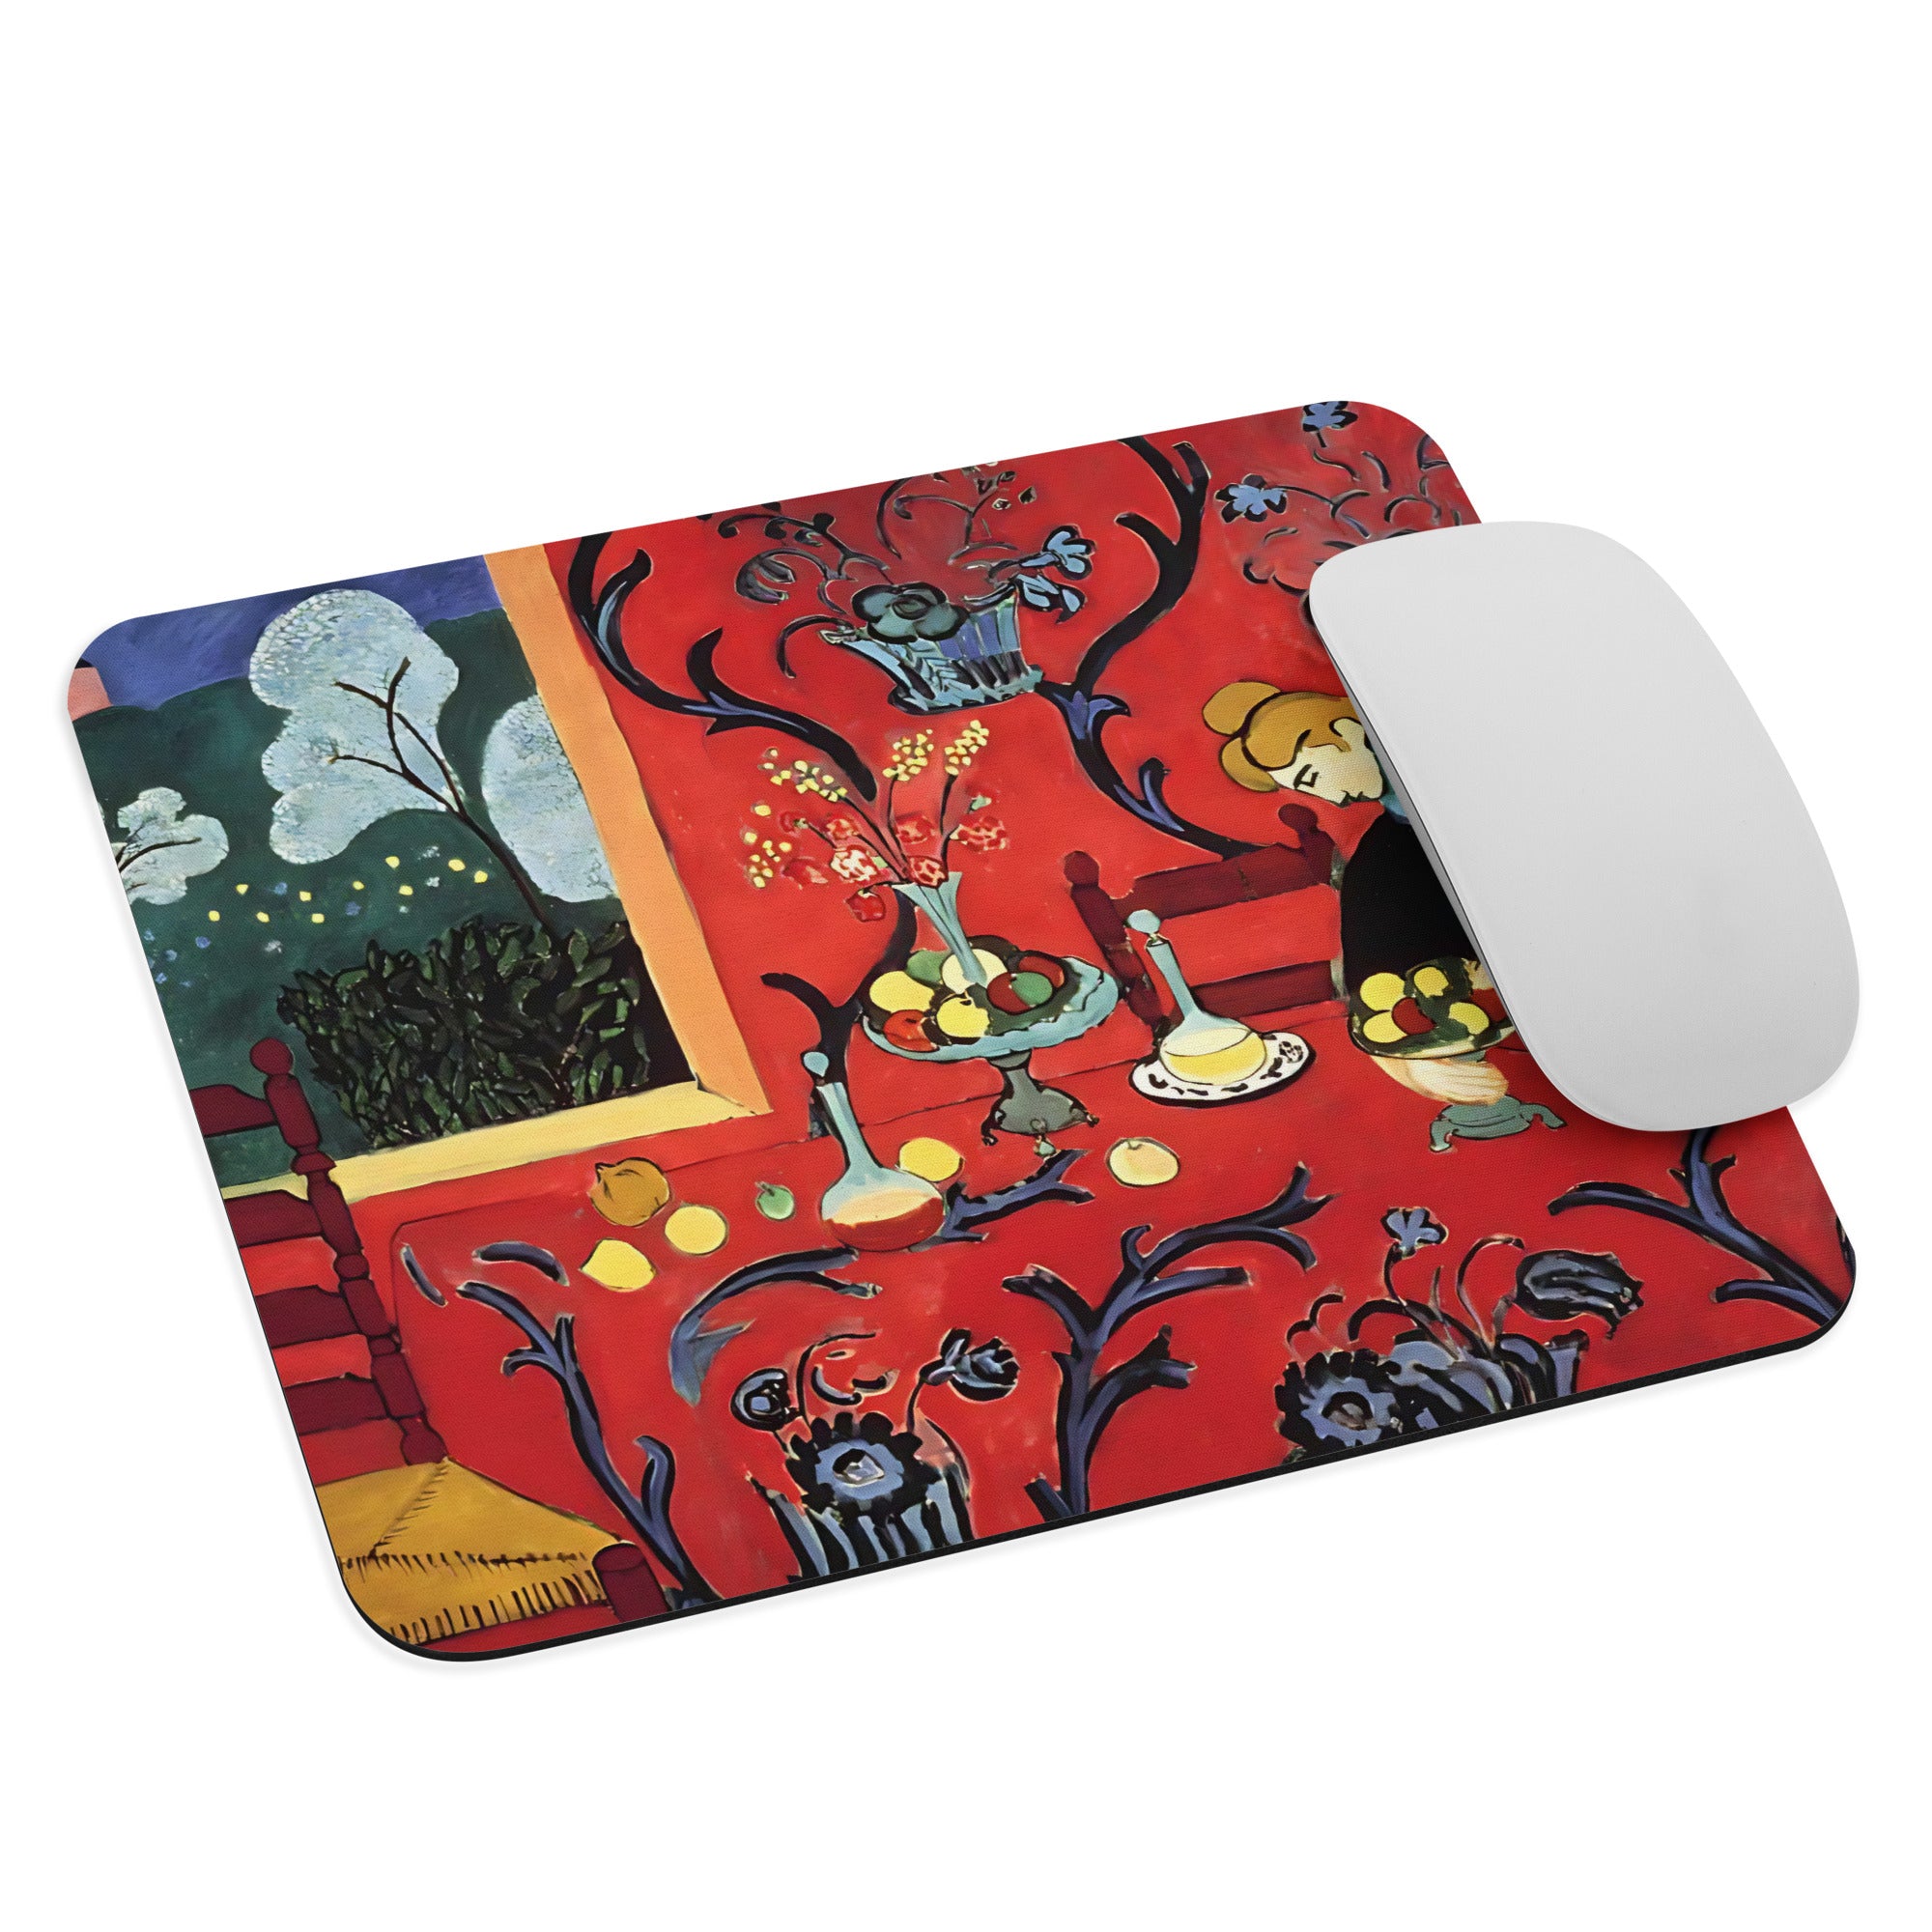 Henri Matisse ‘The Red Room’ Famous Painting Mouse Pad | Premium Art Mouse Pad